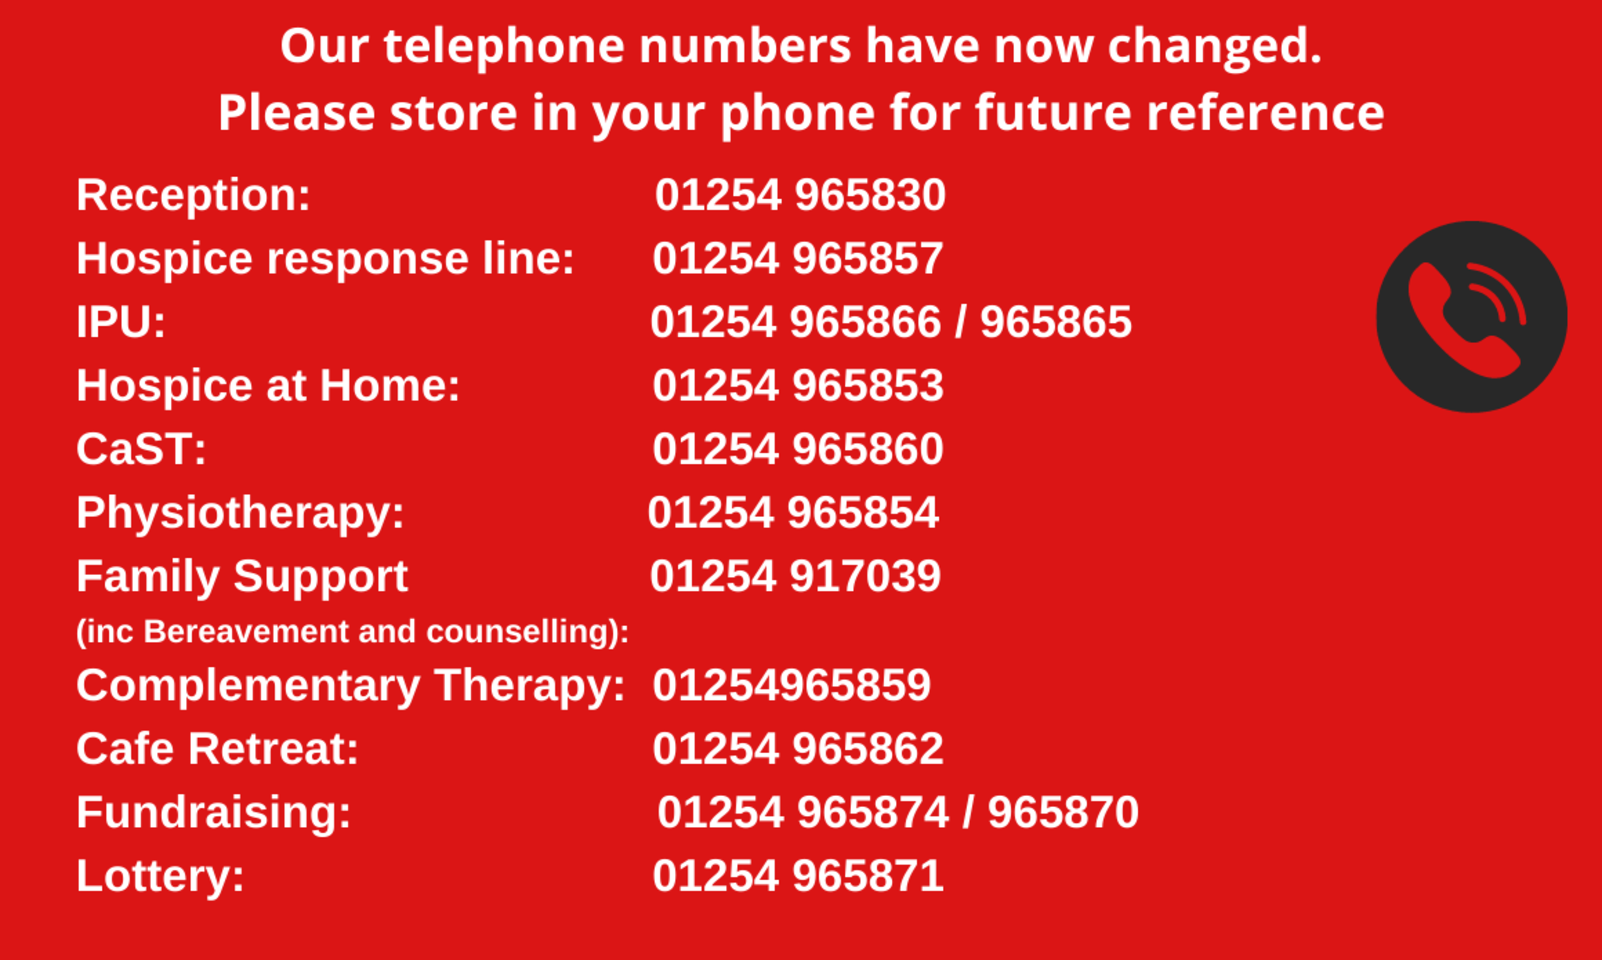 New phone numbers